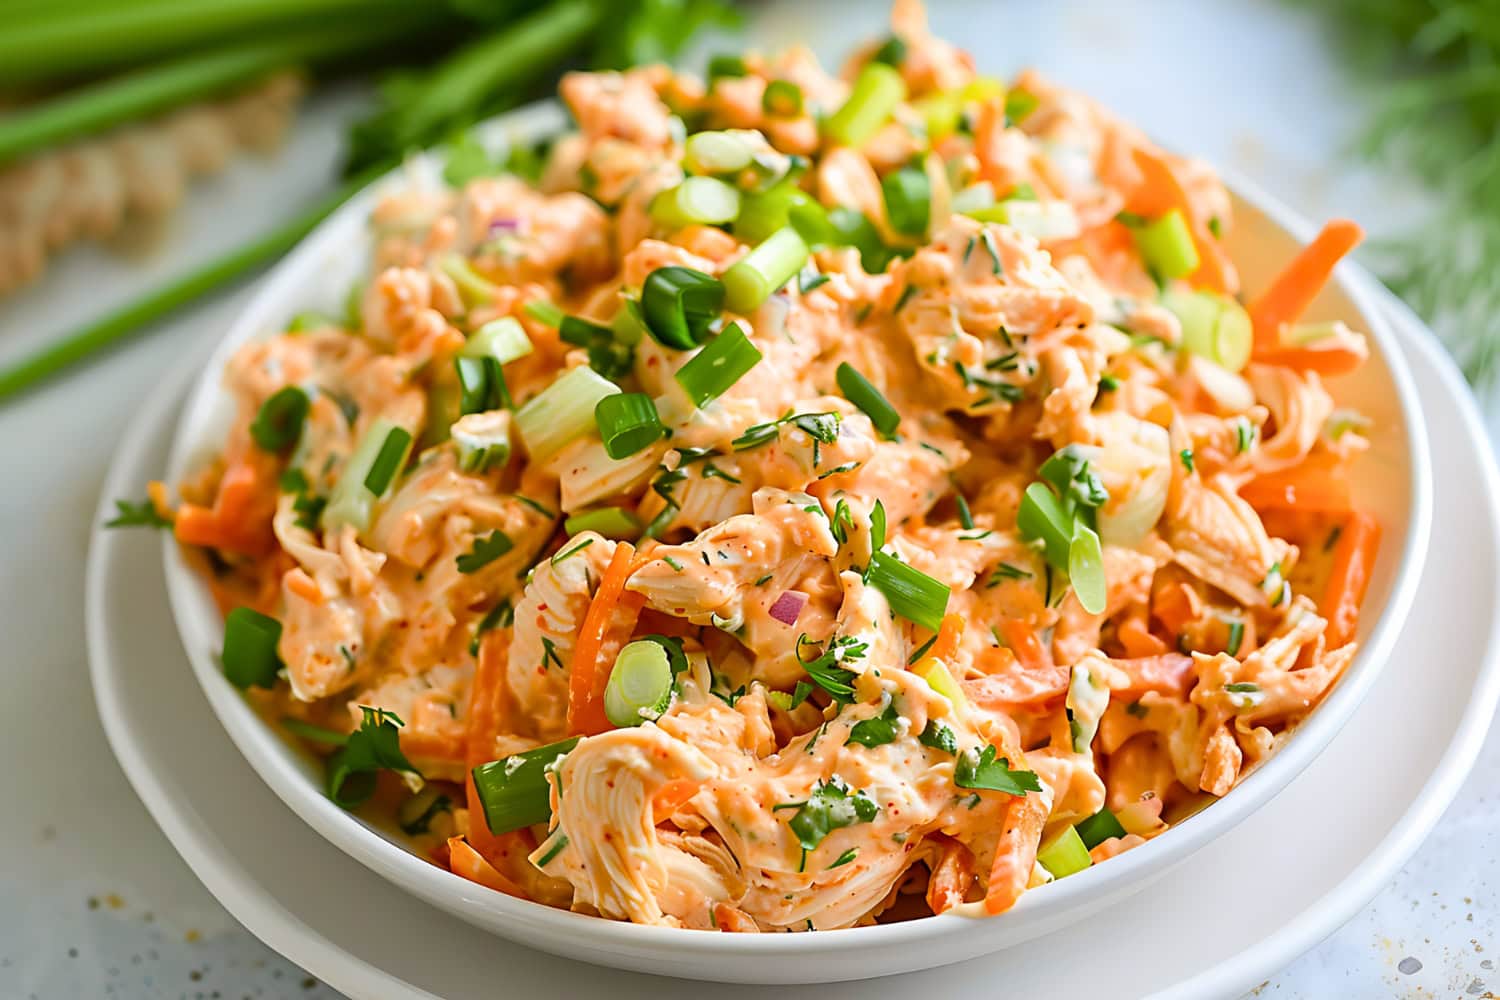 Buffalo chicken salad served on a white bowl.